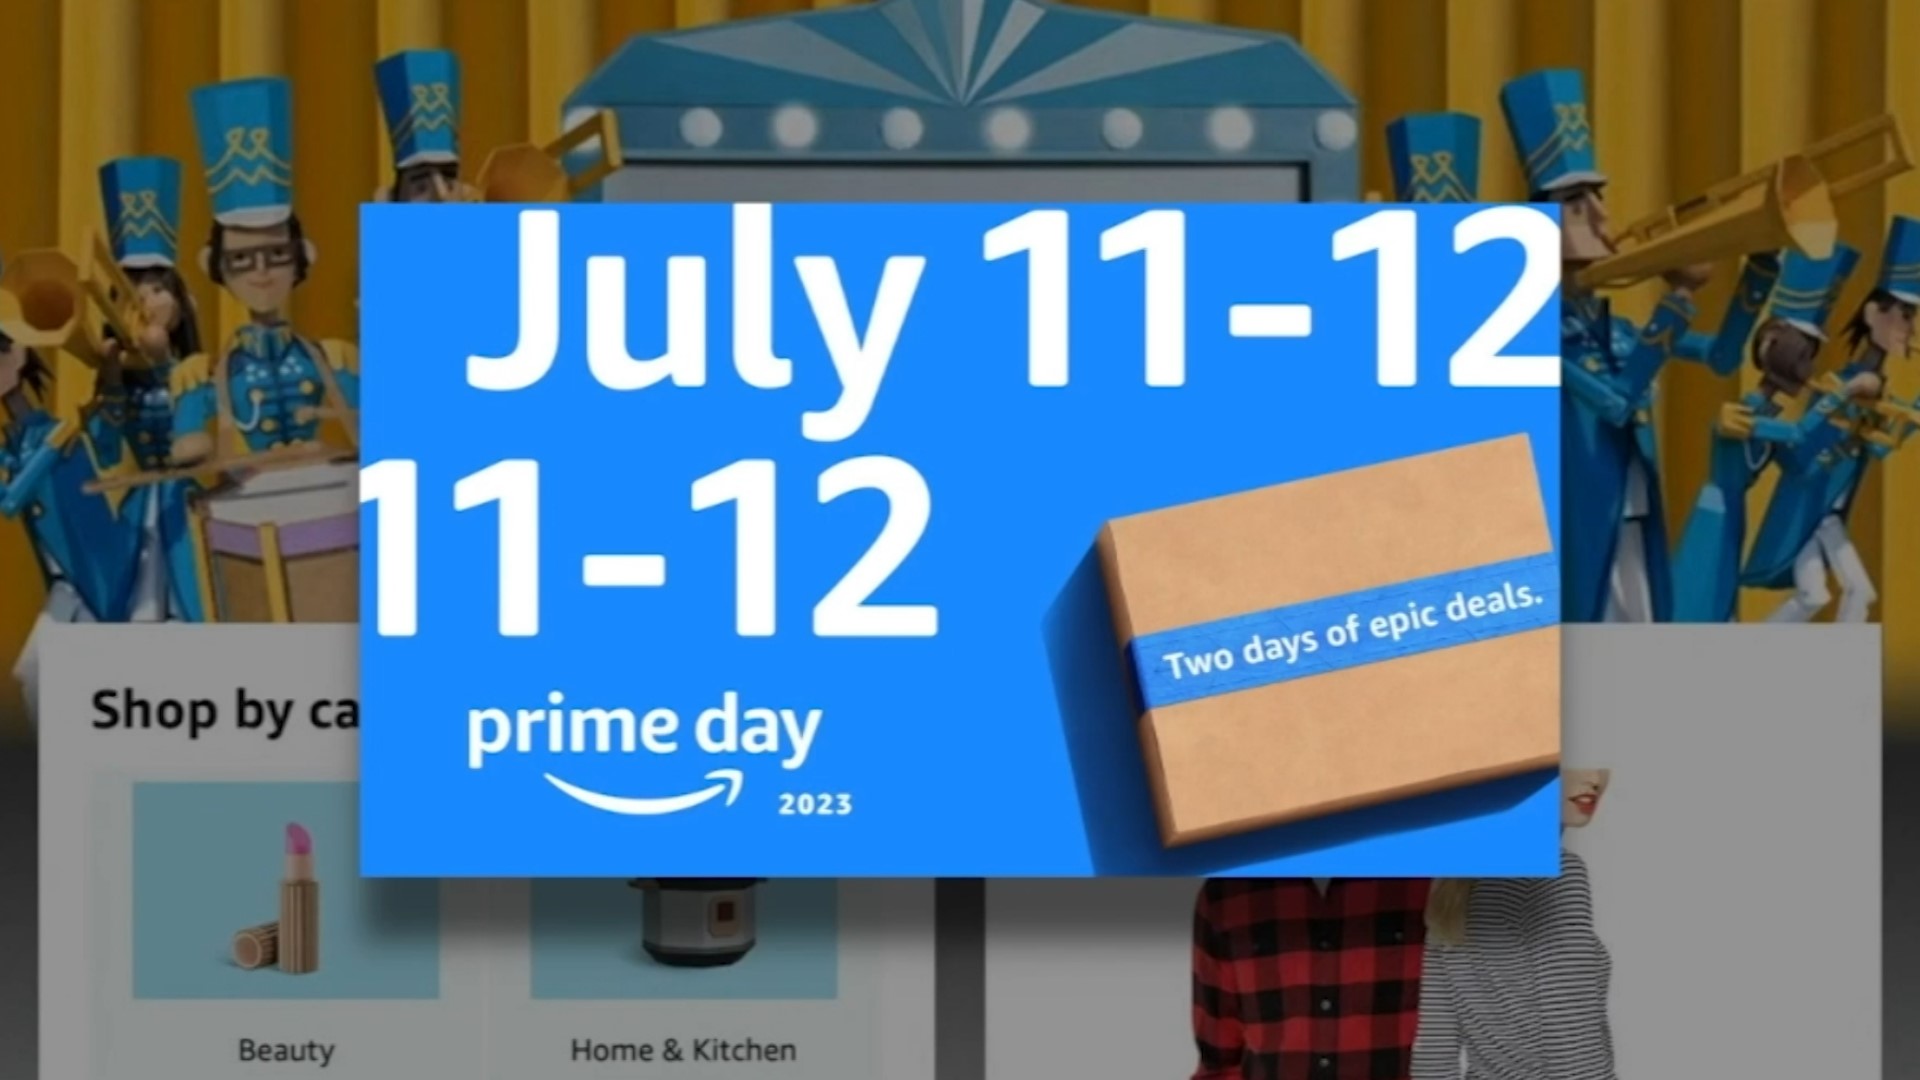 Best Prime Day deals: The best deals to shop this year